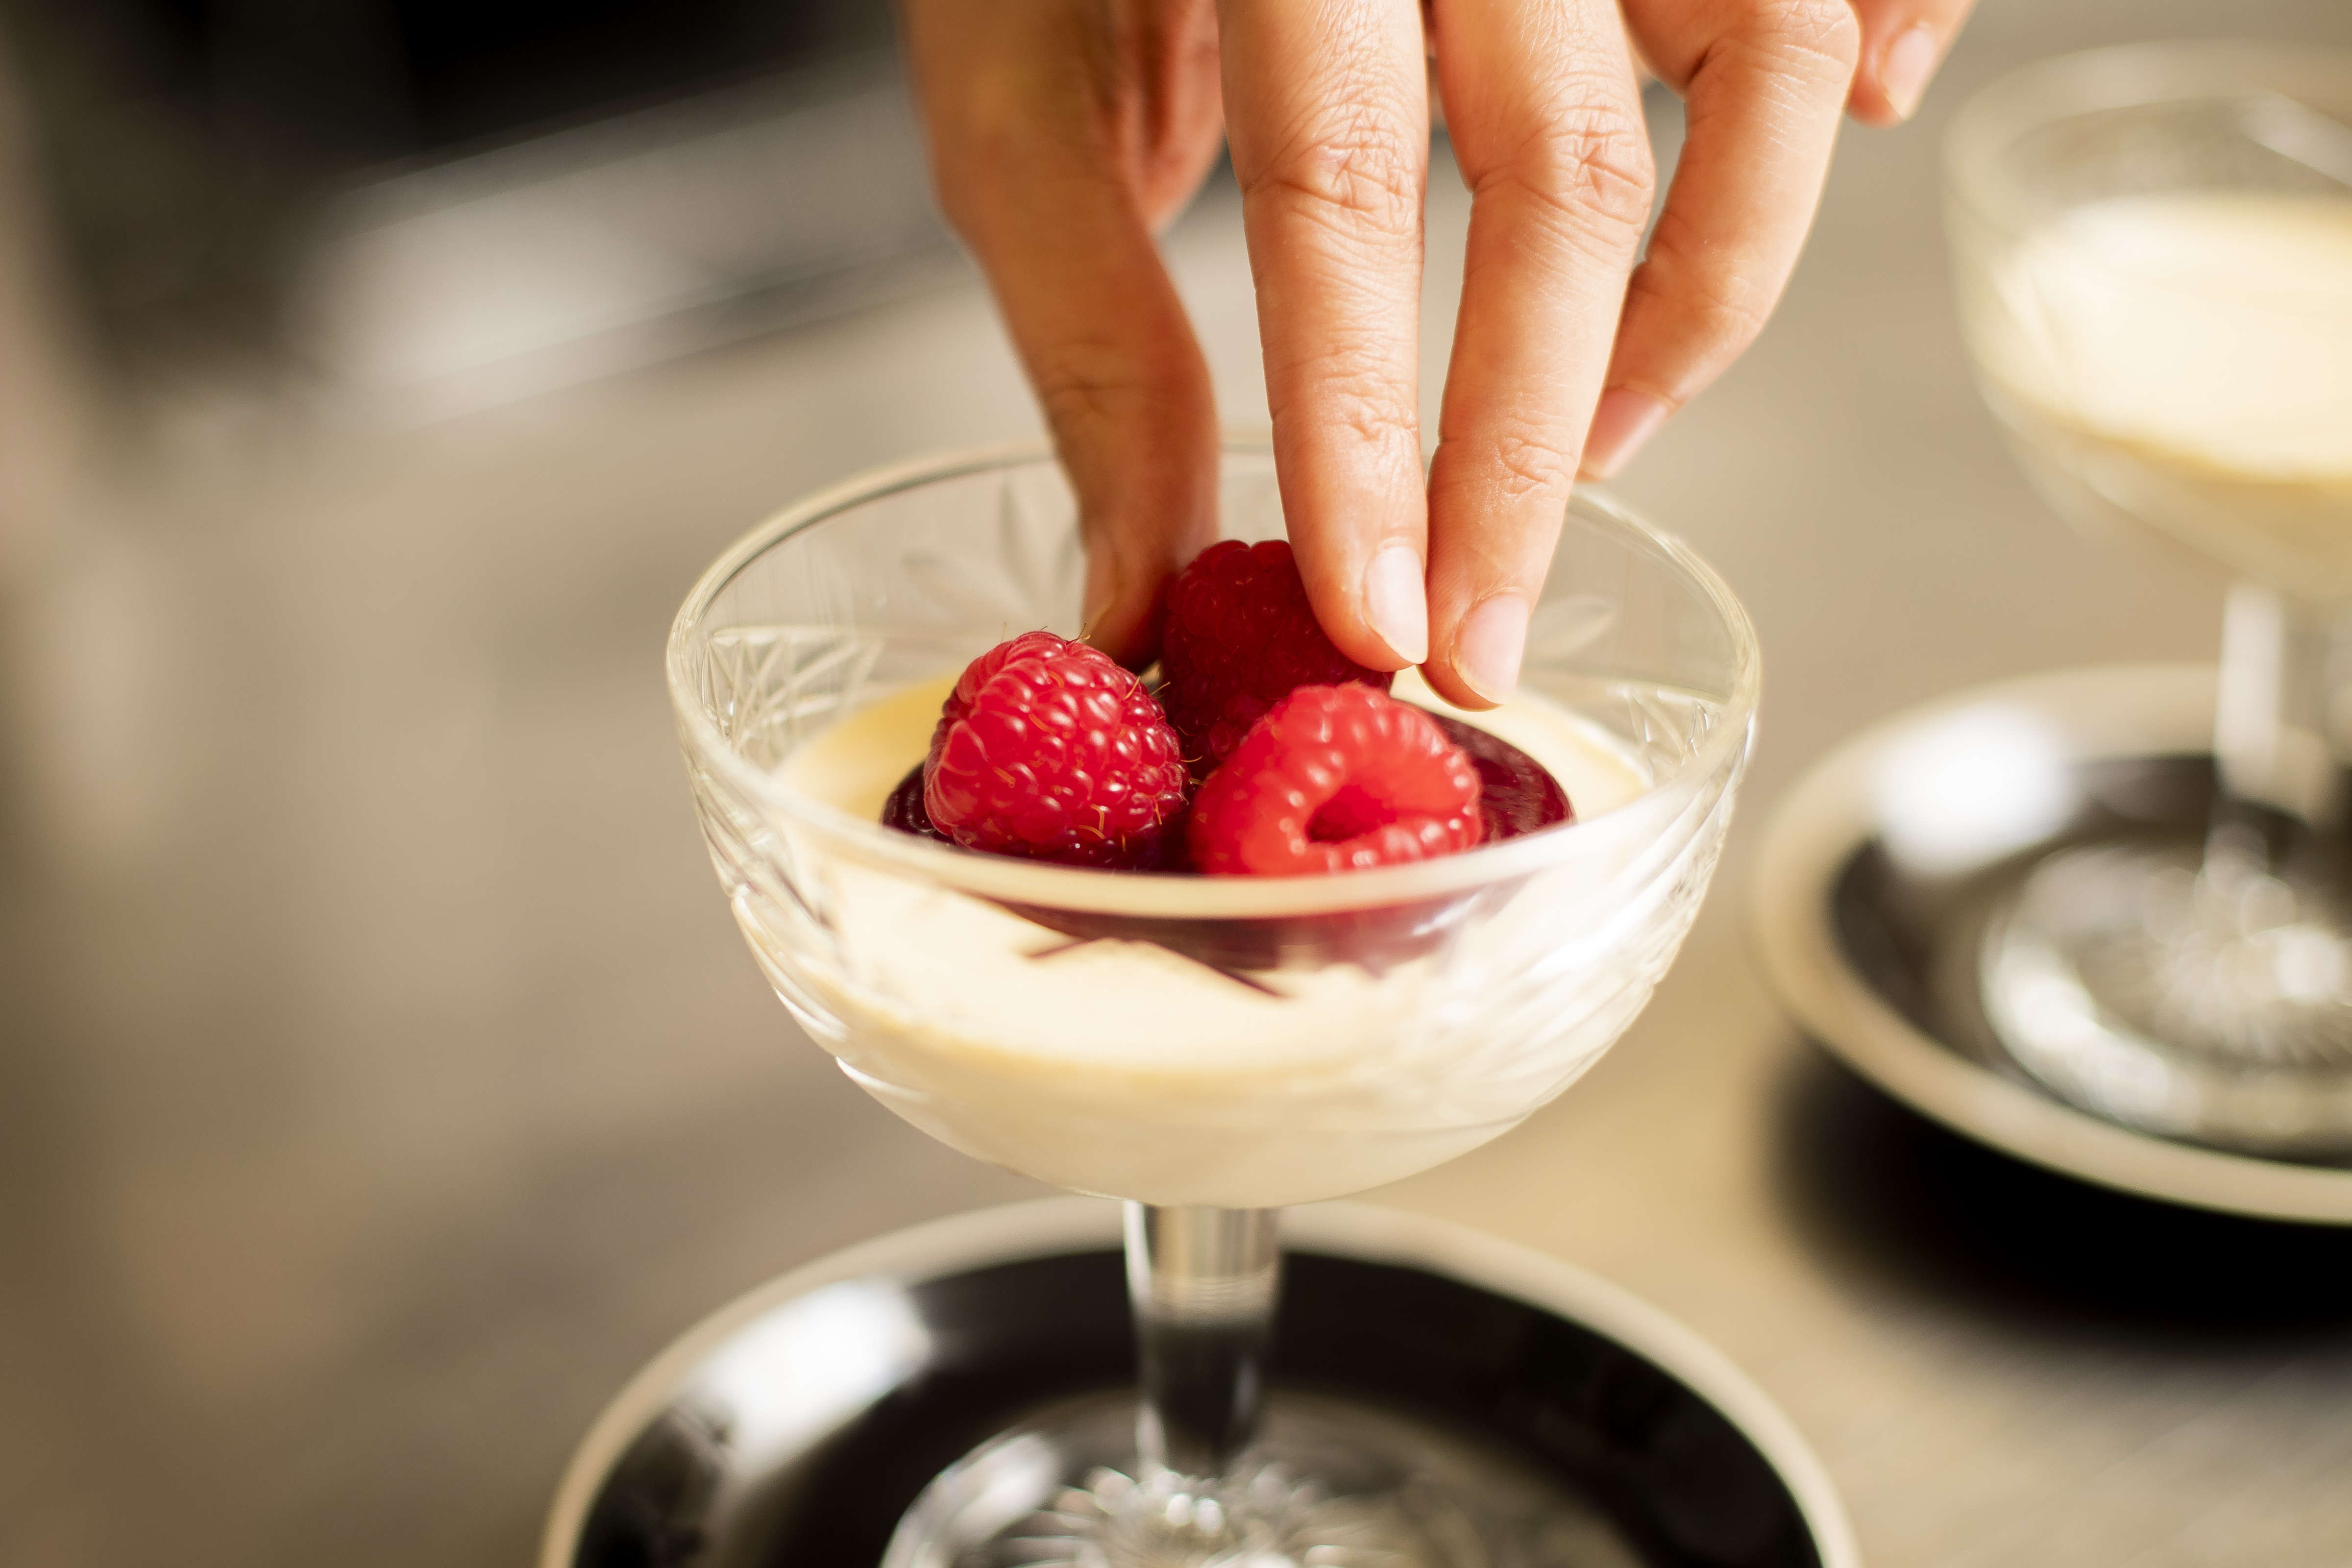 Vanilla panna cotta with raspberry coulis and fresh raspberries being placed on top. Photo: Richard Jupe.